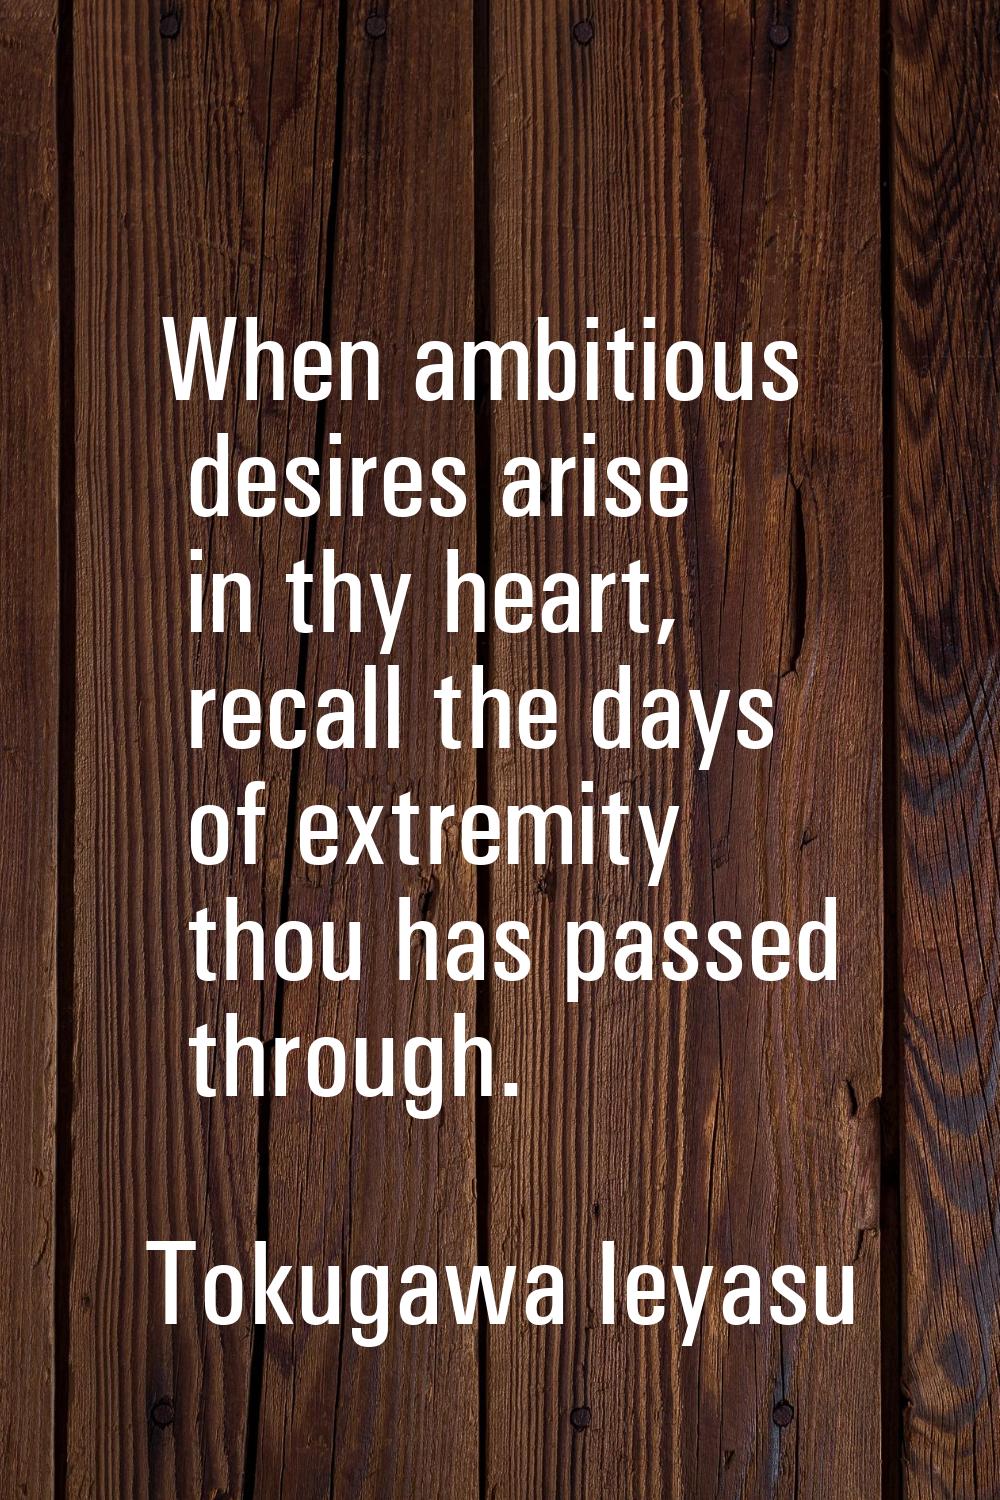 When ambitious desires arise in thy heart, recall the days of extremity thou has passed through.